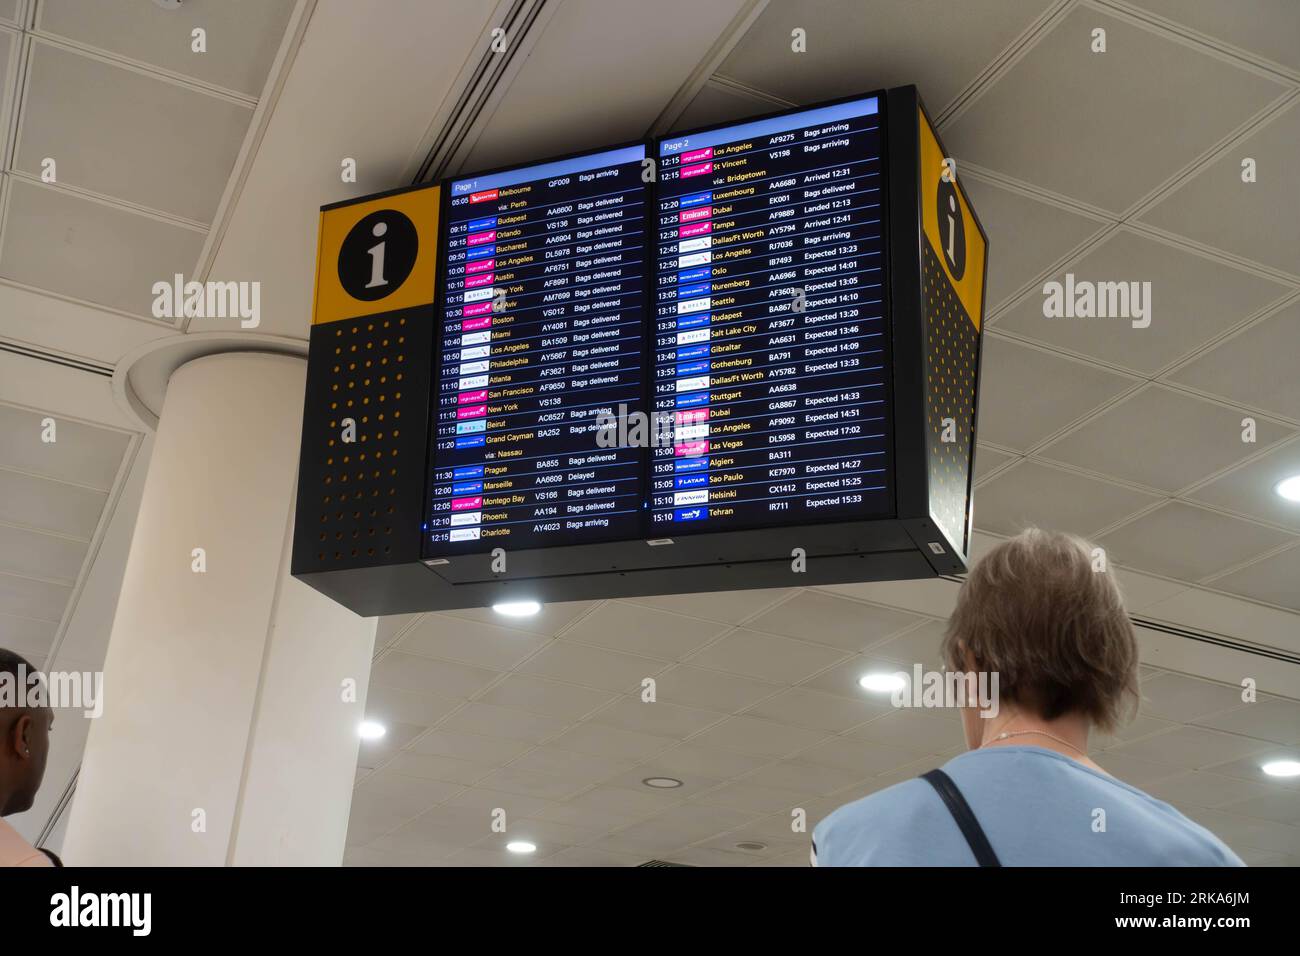 An arrivals board in London Heathrow Airport Terminal 3 giving information of when flights arrive. Stock Photo